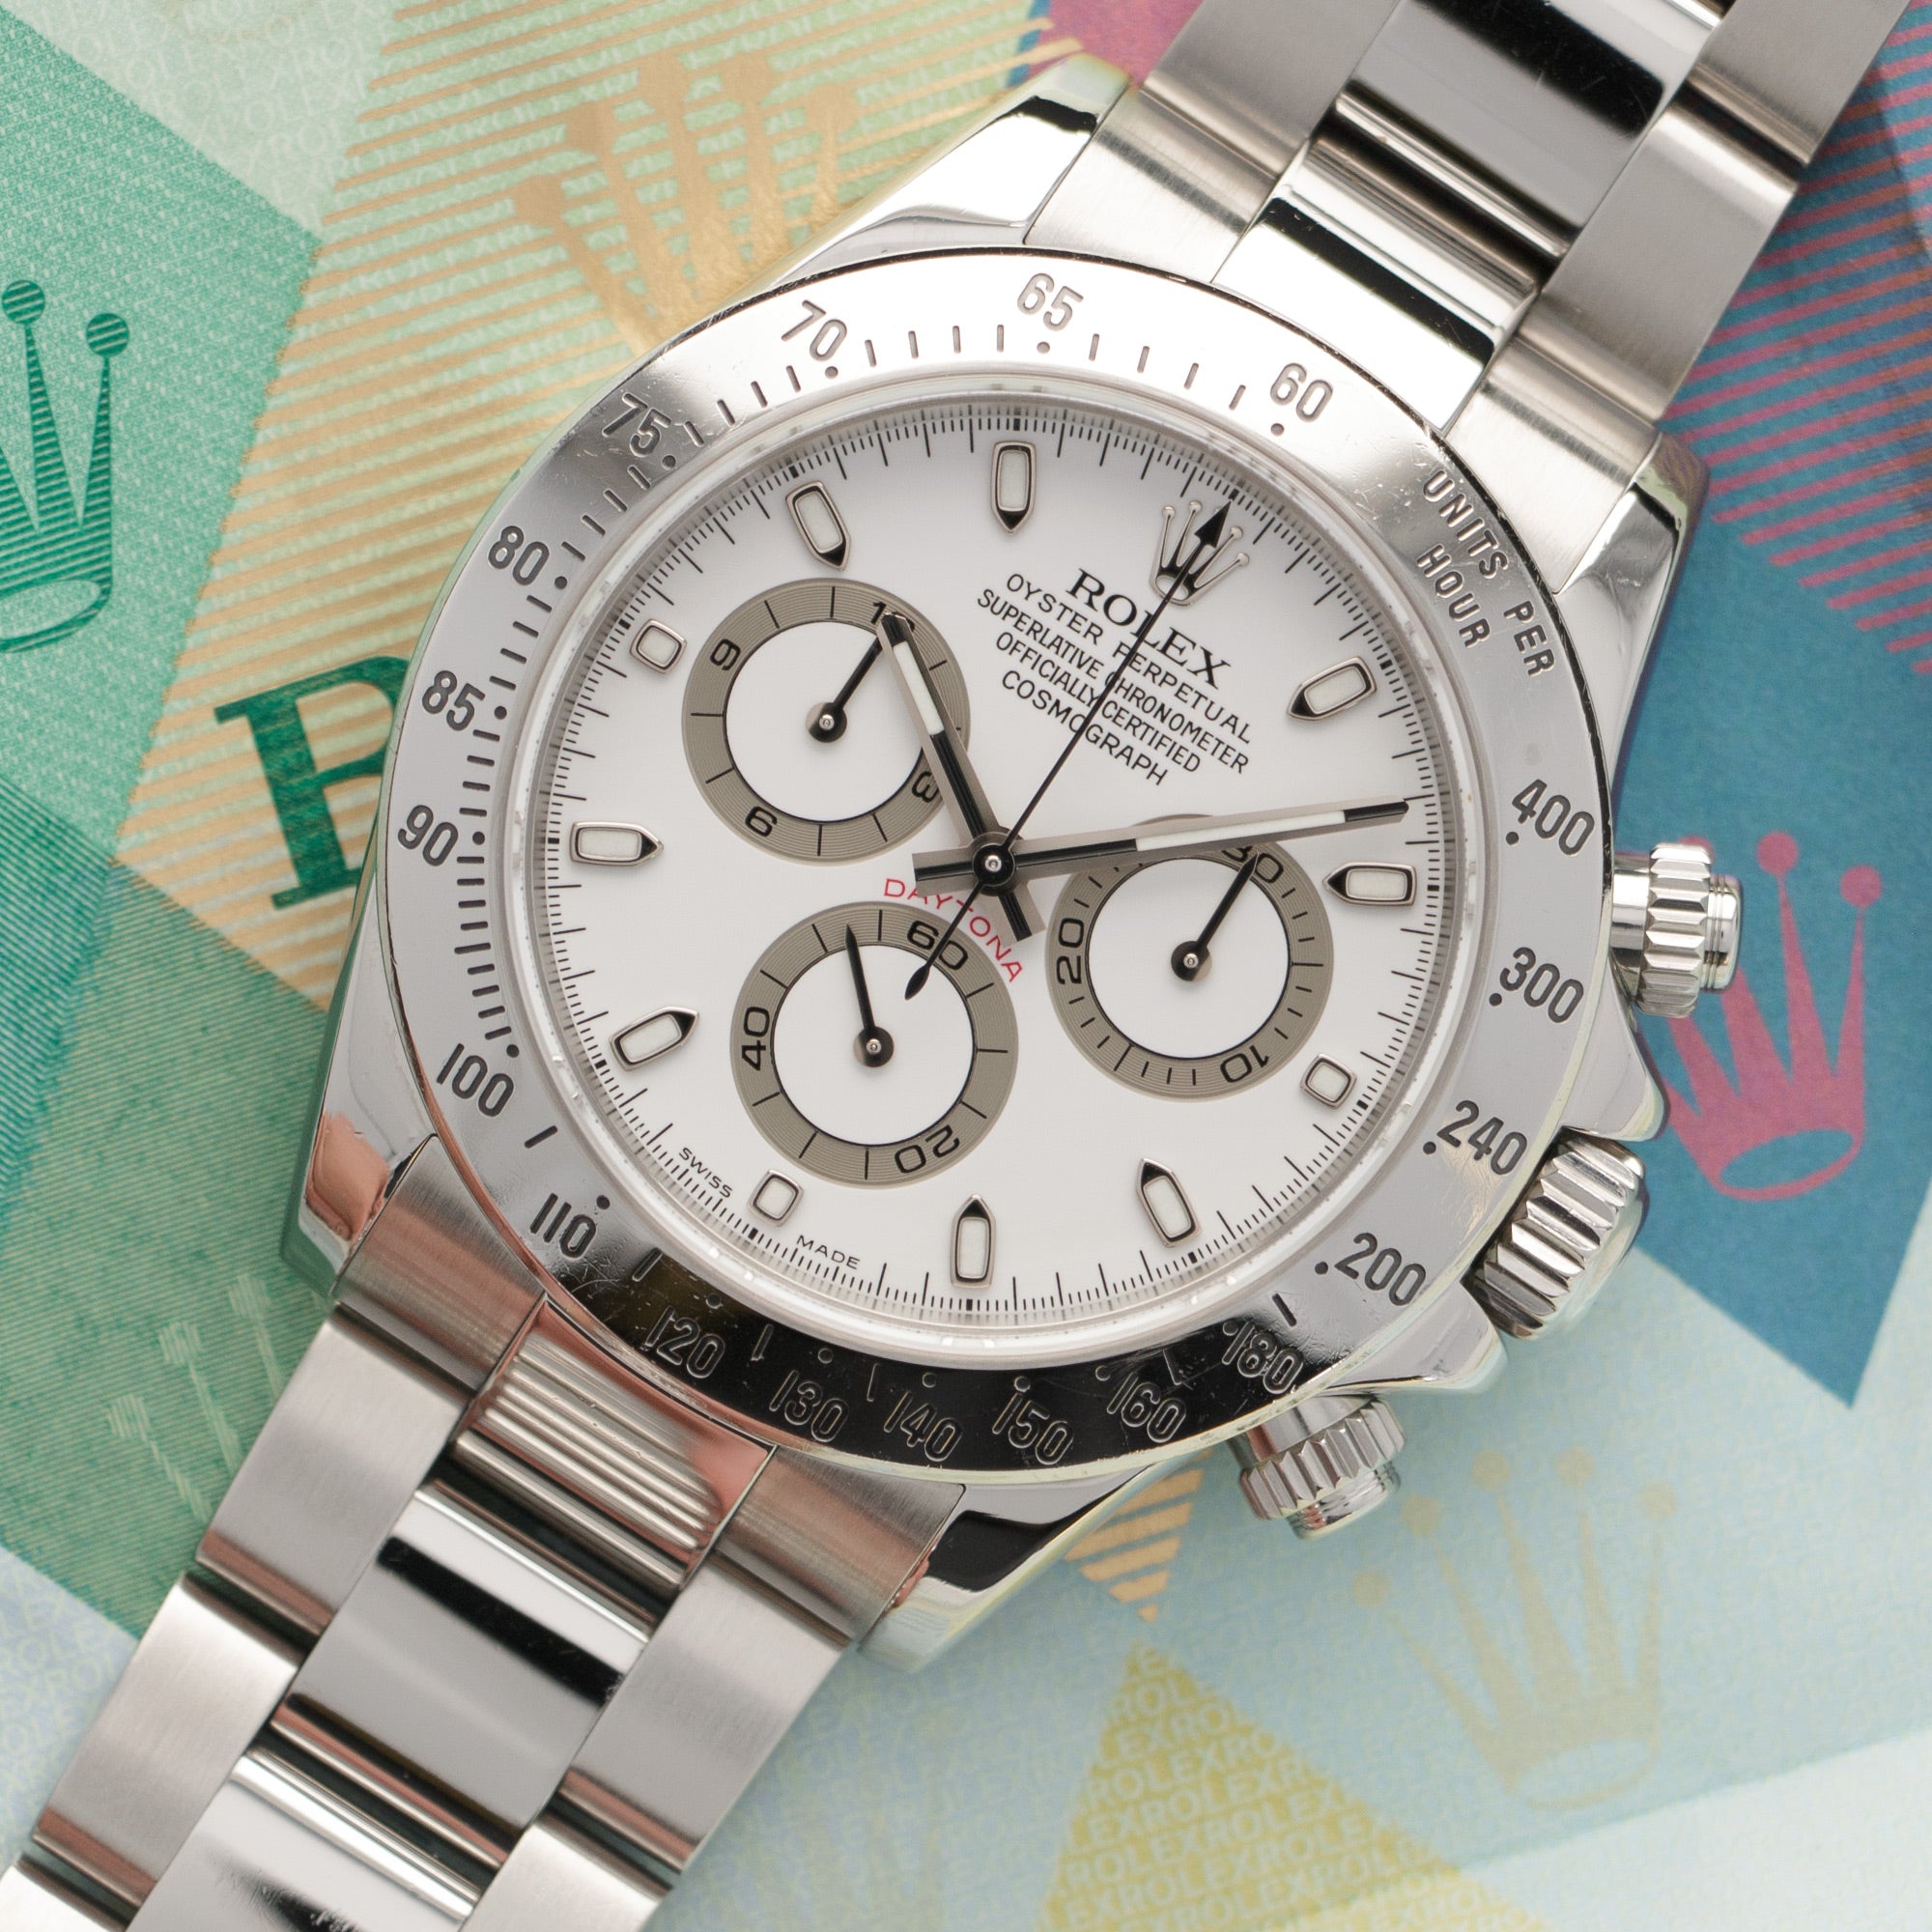 Rolex - Rolex Cosmograph Daytona Watch Ref. 116520 with Original Box and Papers - The Keystone Watches